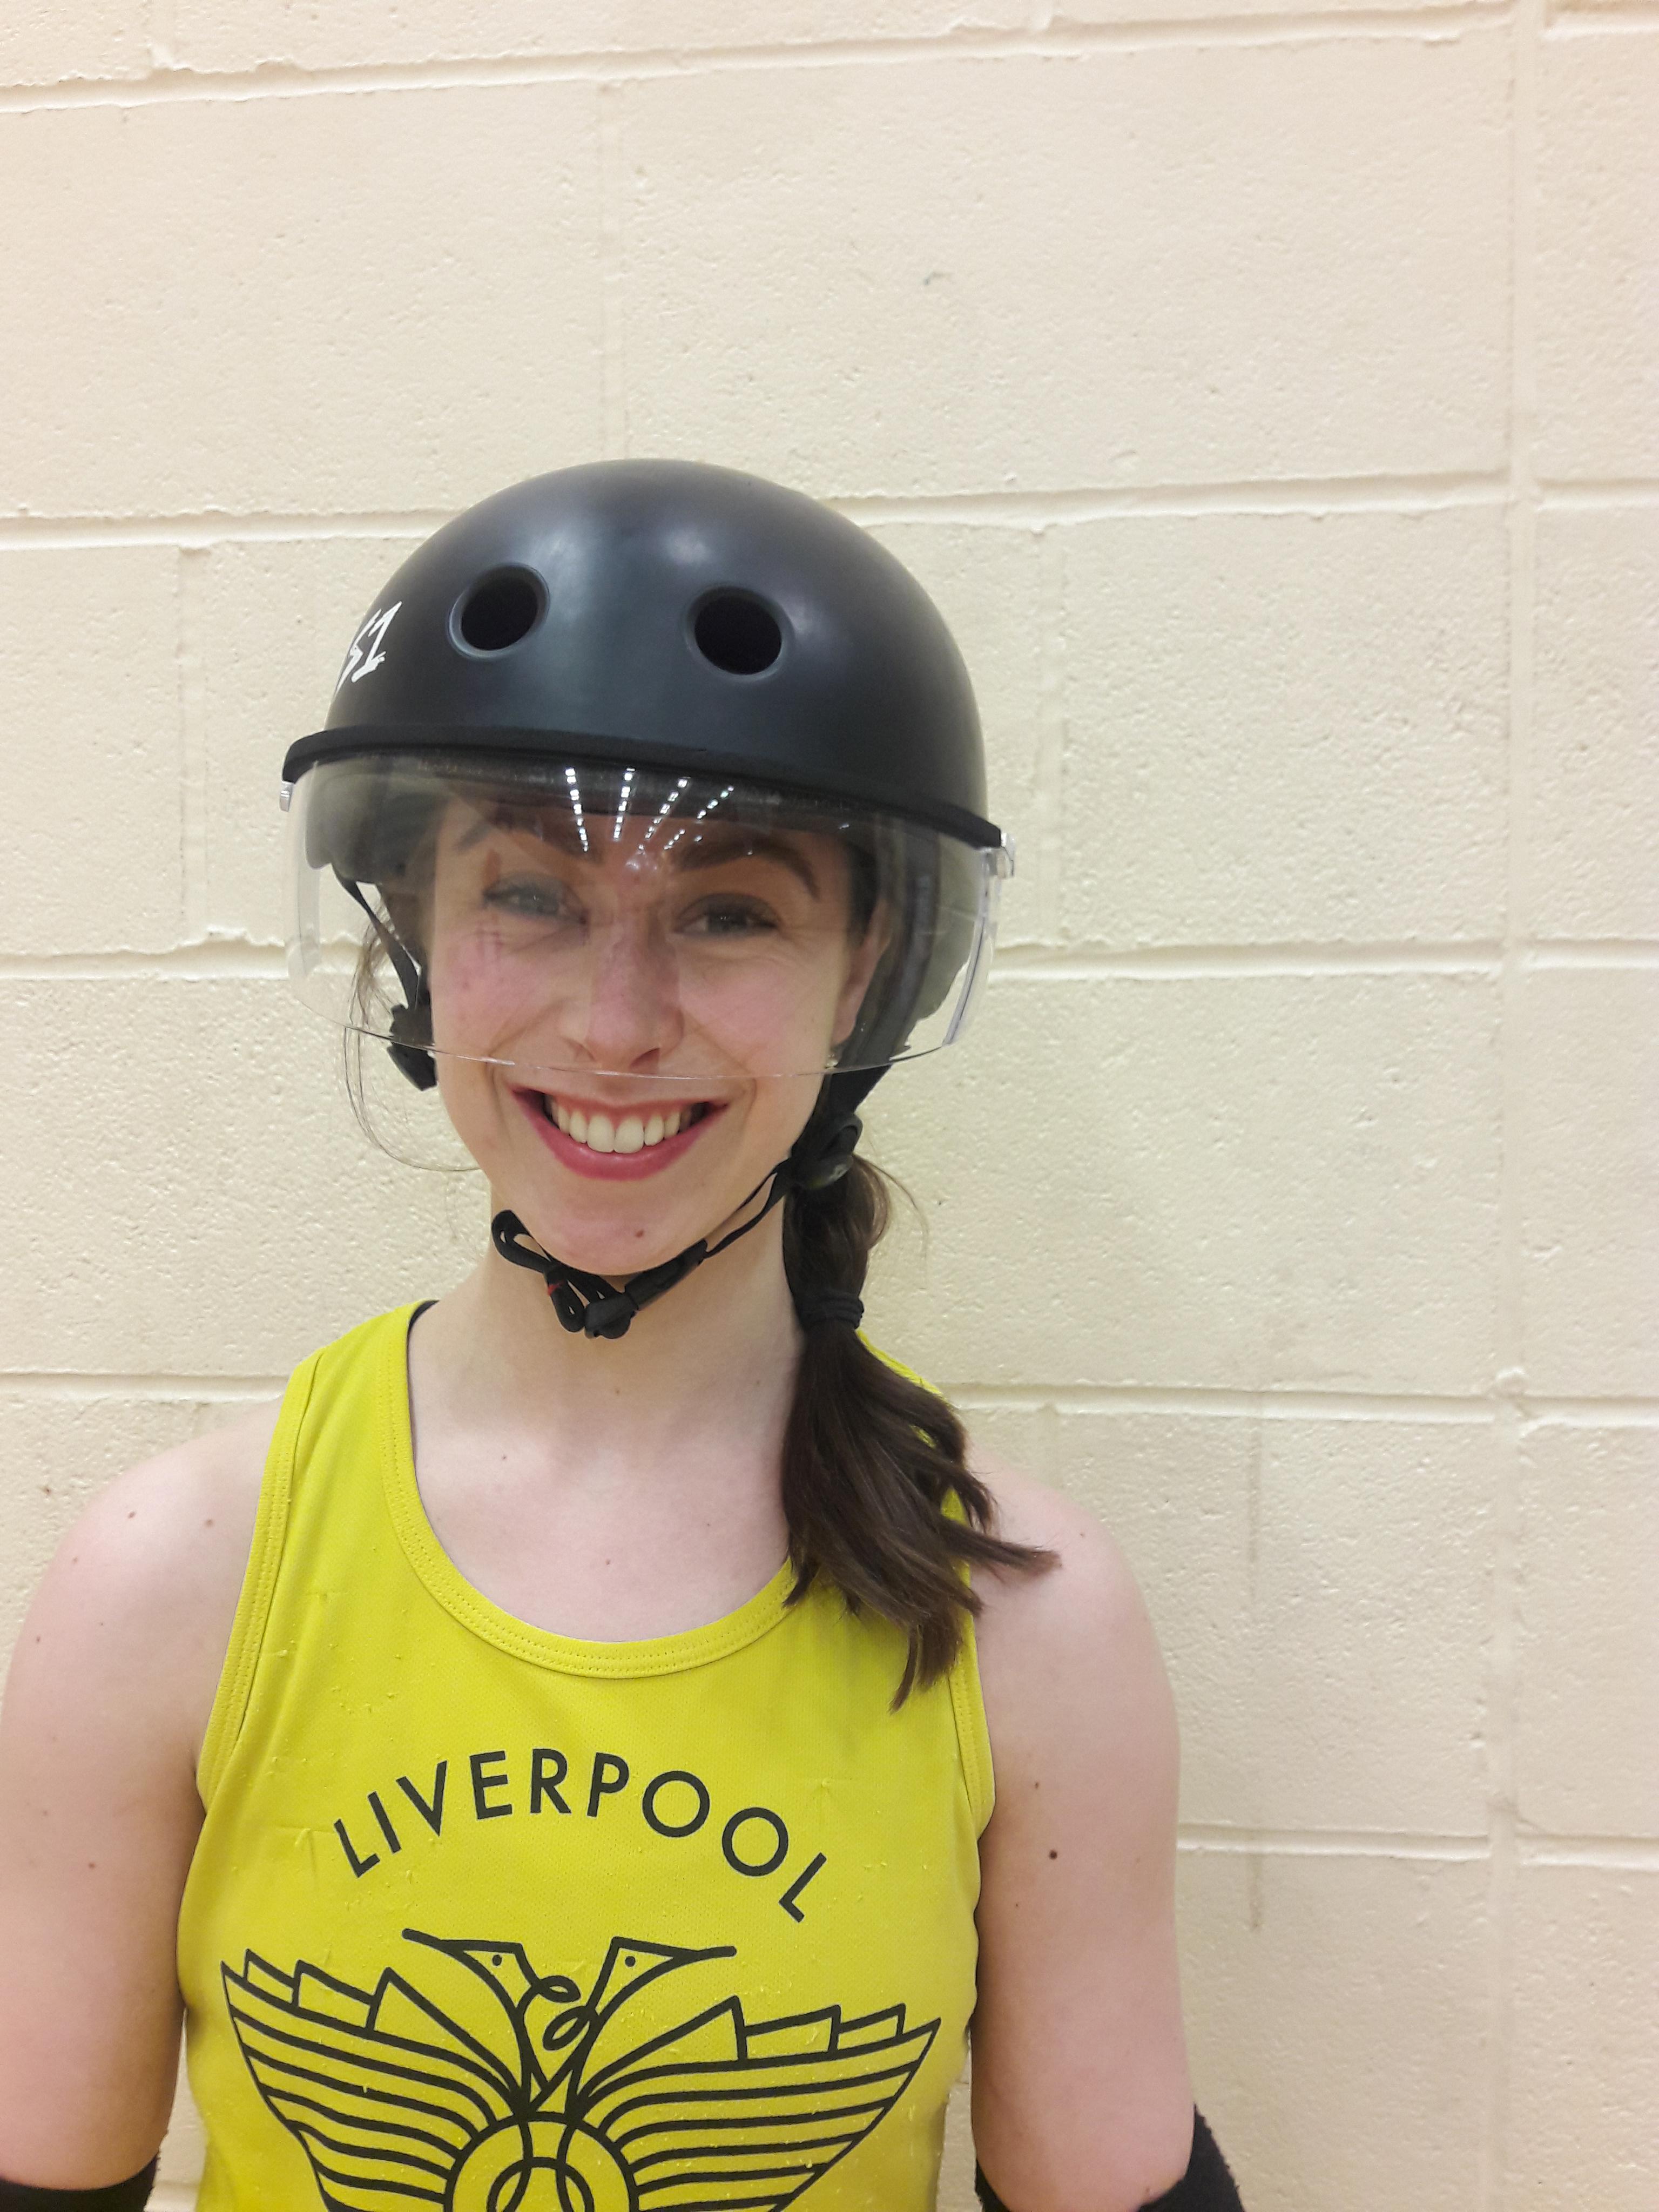 From DIY ethics to athleticism – how roller derby continues to #PressForProgress